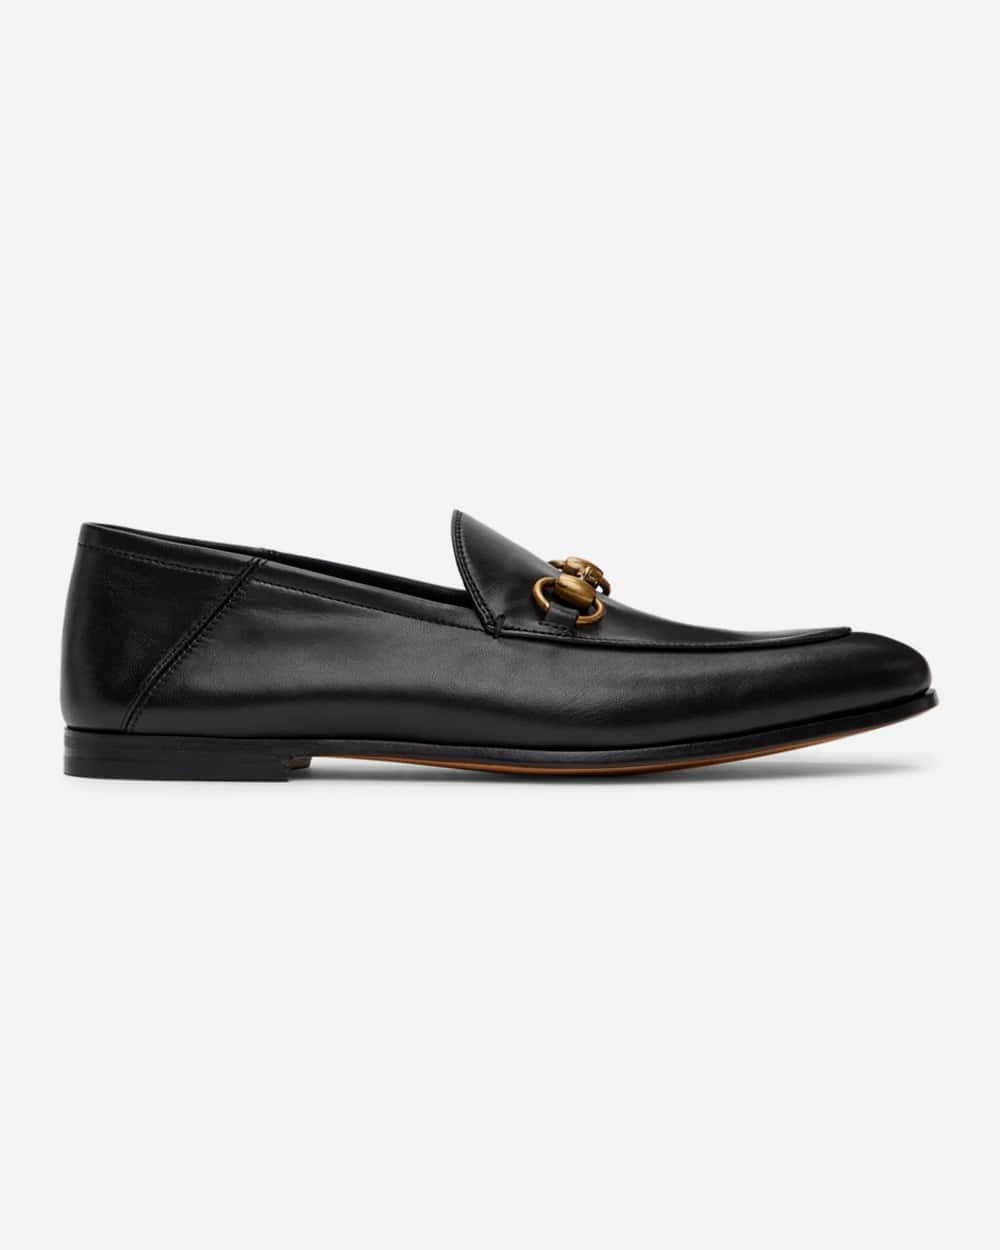 19 Luxury Loafer Brands Making The Highest Quality Slip Ons